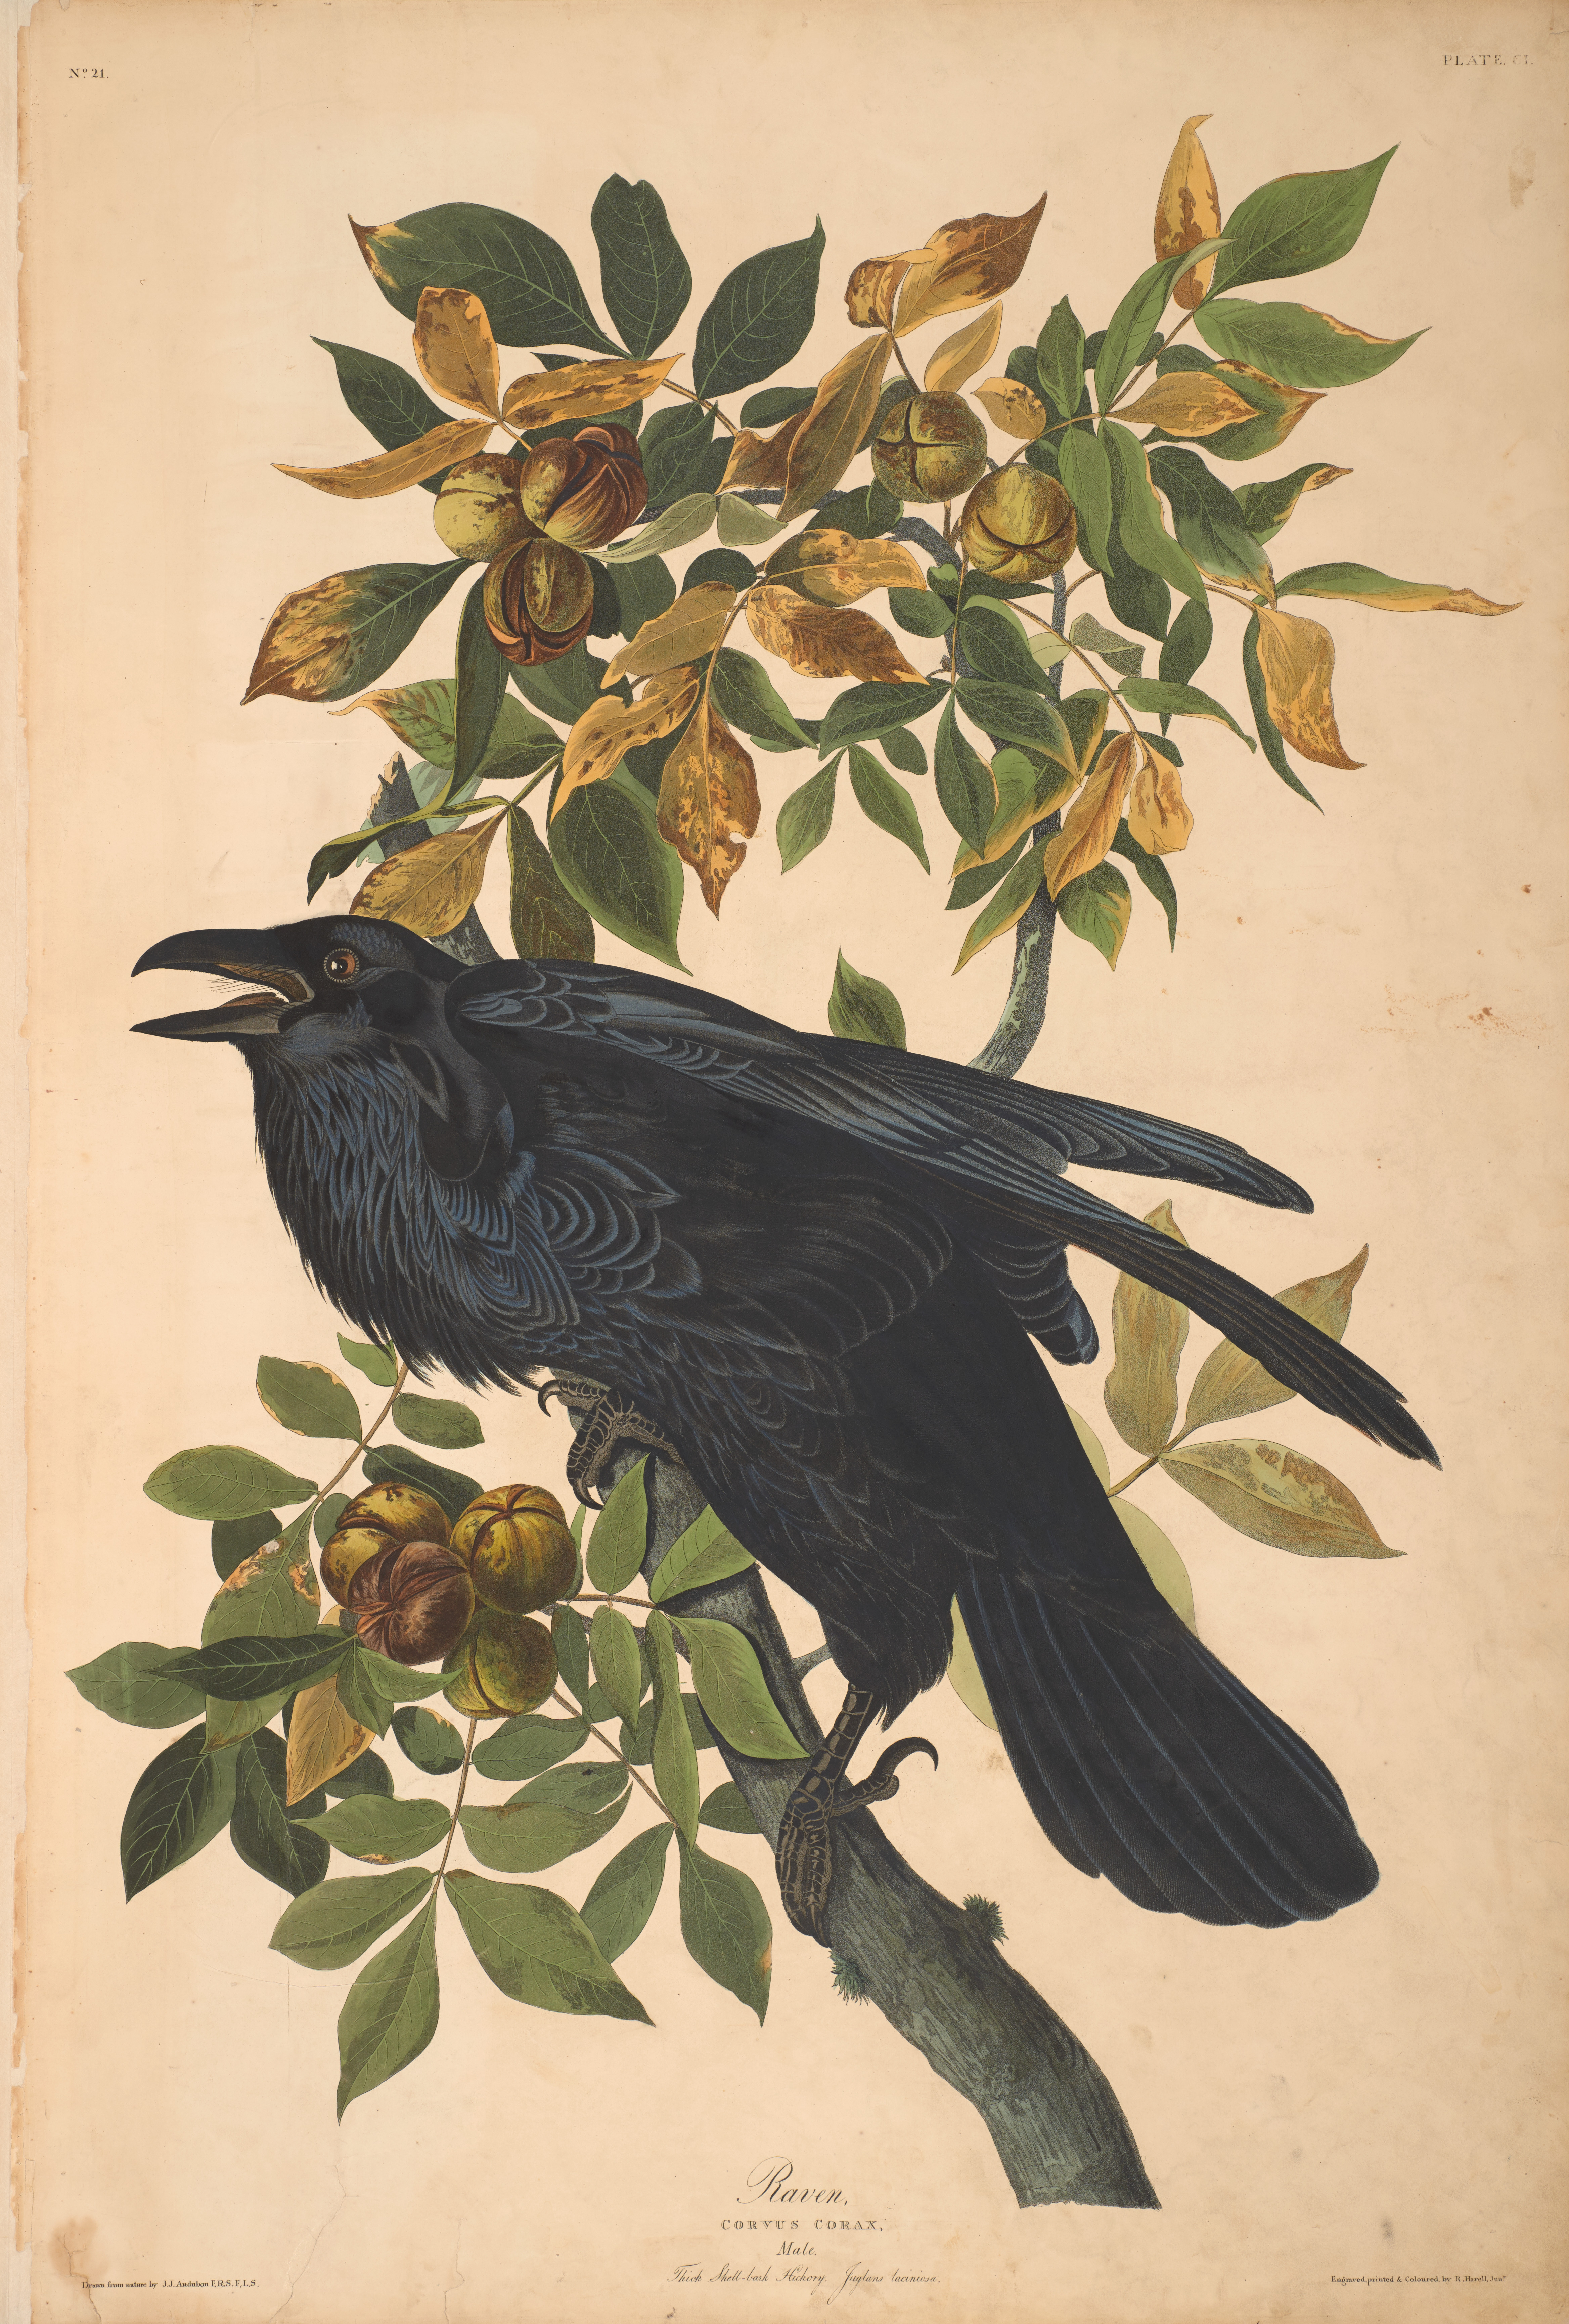 John James Audubon, Raven, from The Birds of America, 1827 – 38 , hand - colored aquatint/engraving on paper , 40 x 26 in., North Carolina Museum of Art, Transfer from the North Carolina State Library